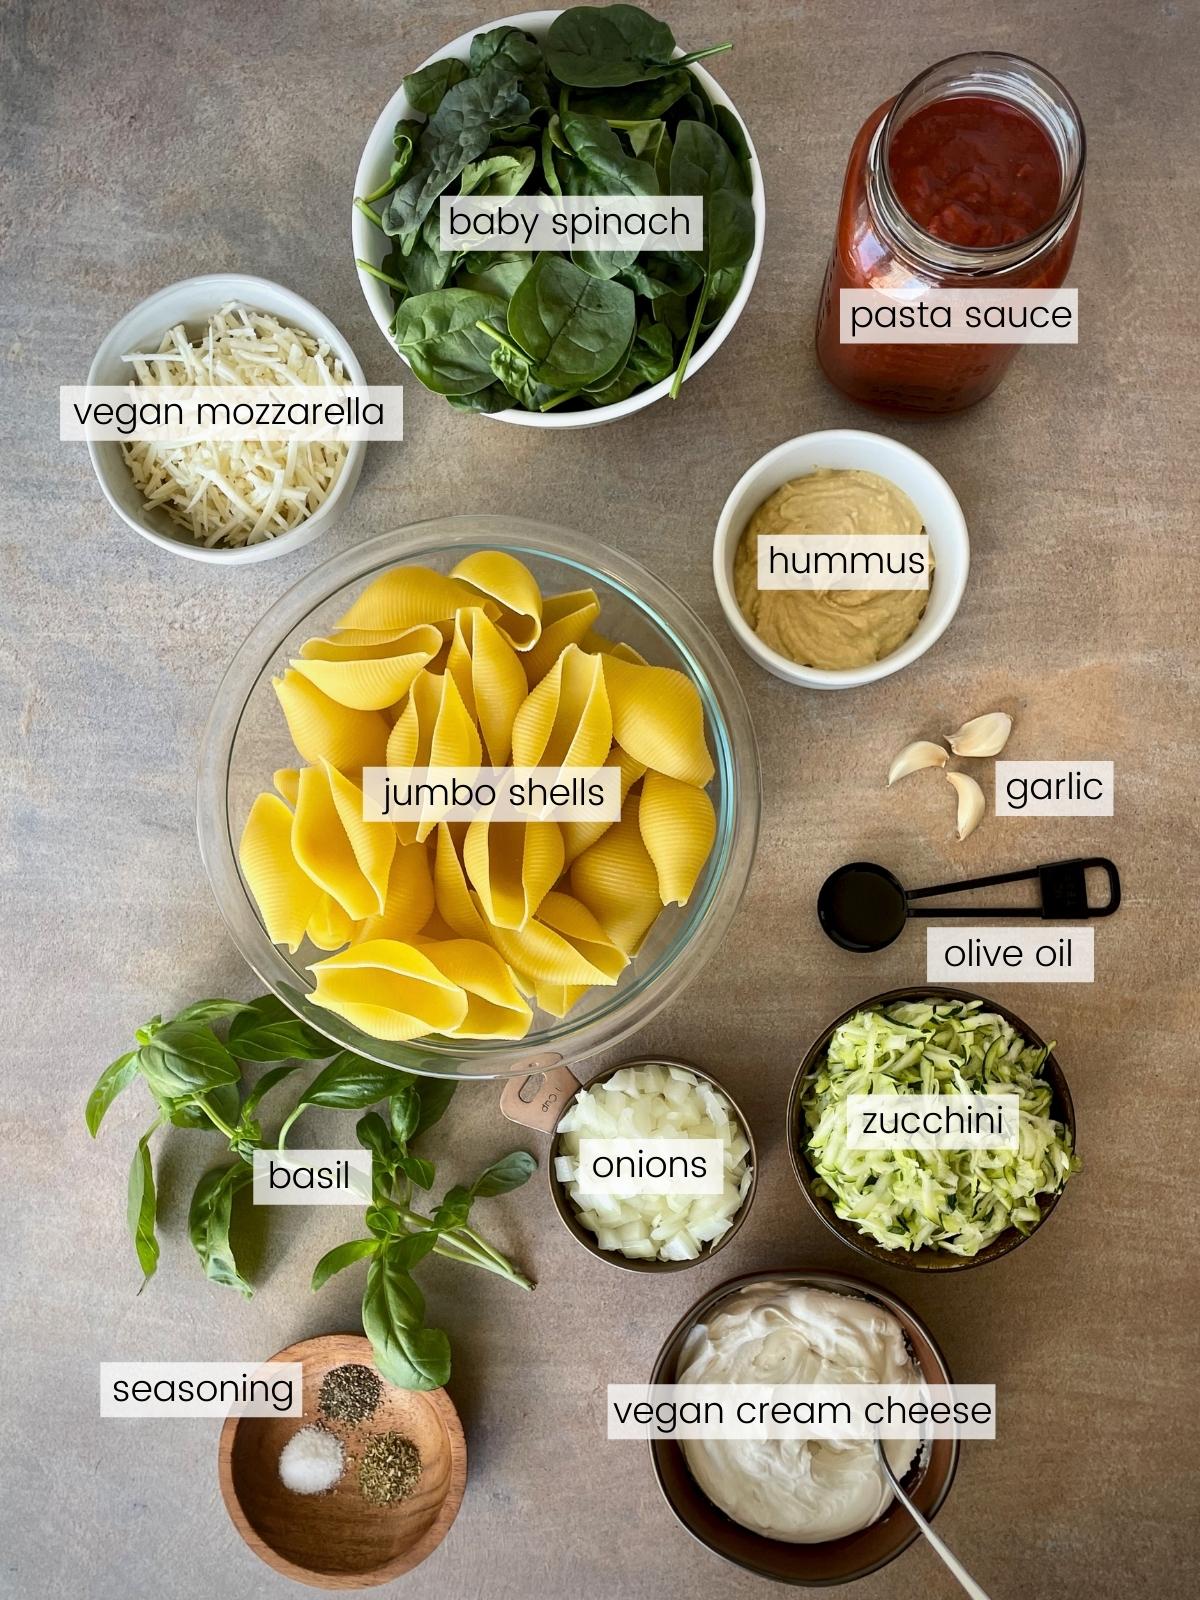 Labeled stuffed shells ingredients